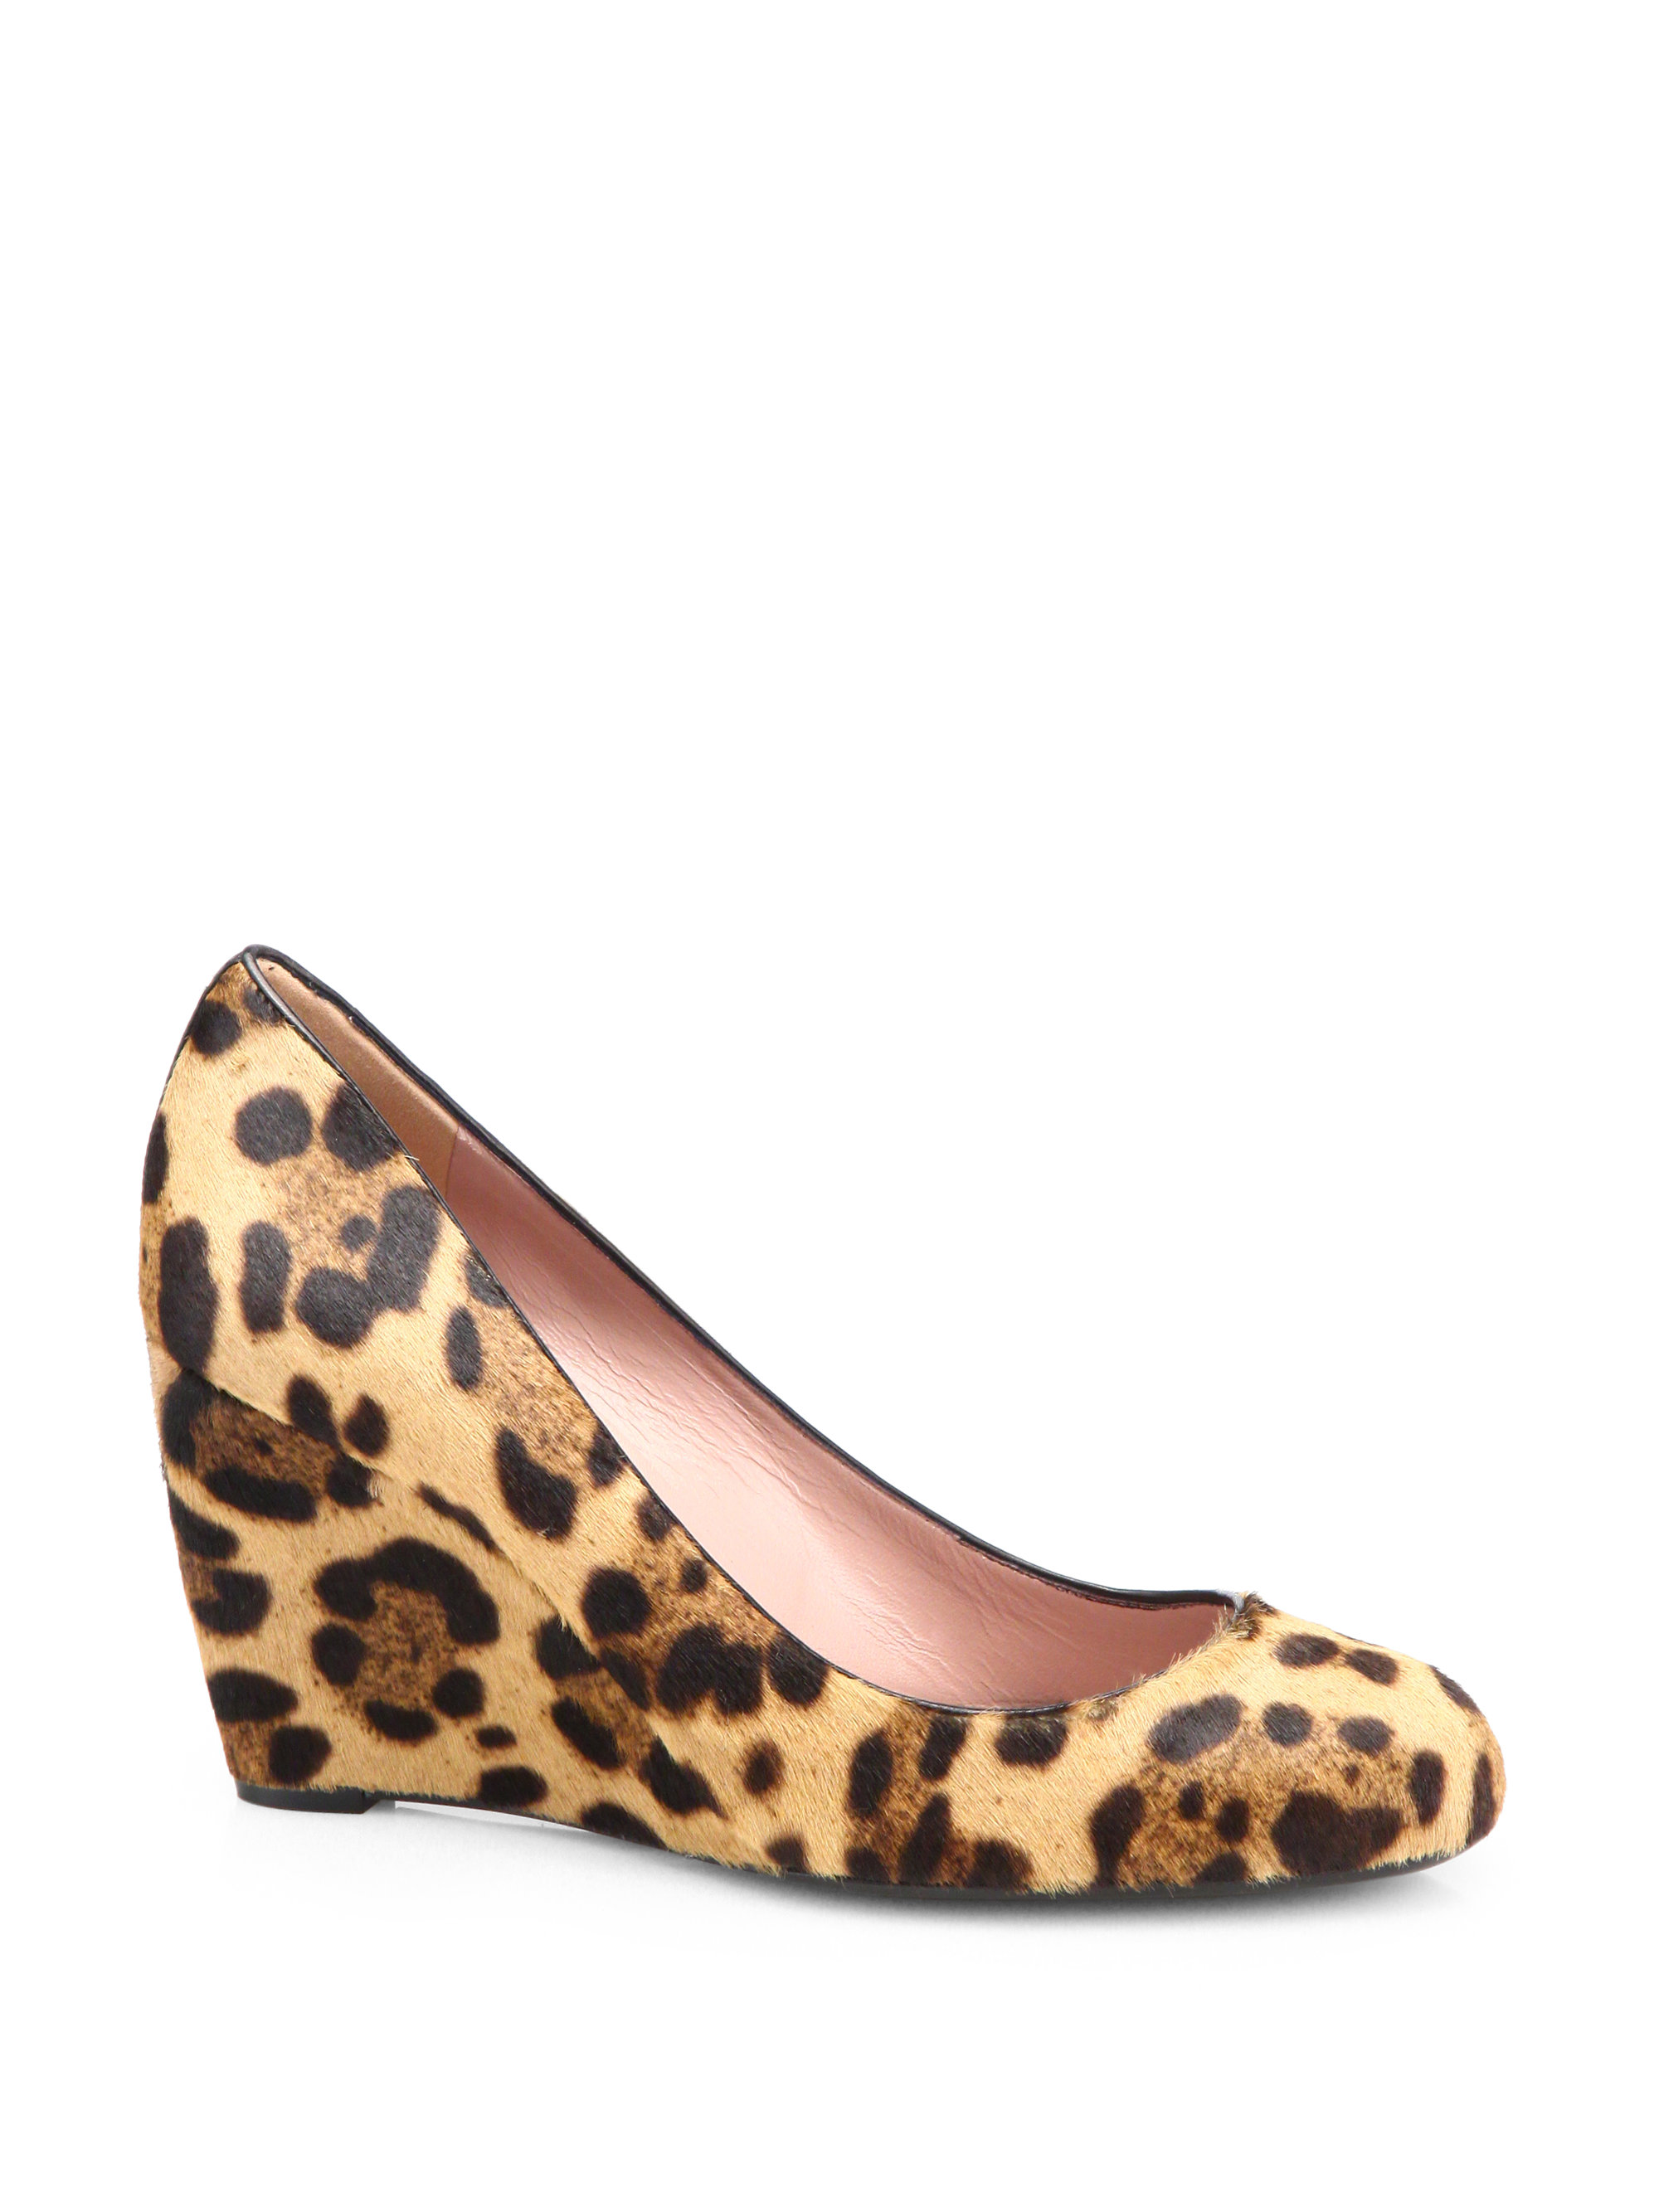 Gucci Leopard-print Pony Hair Wedge Pumps in Beige (LEOPARD) | Lyst